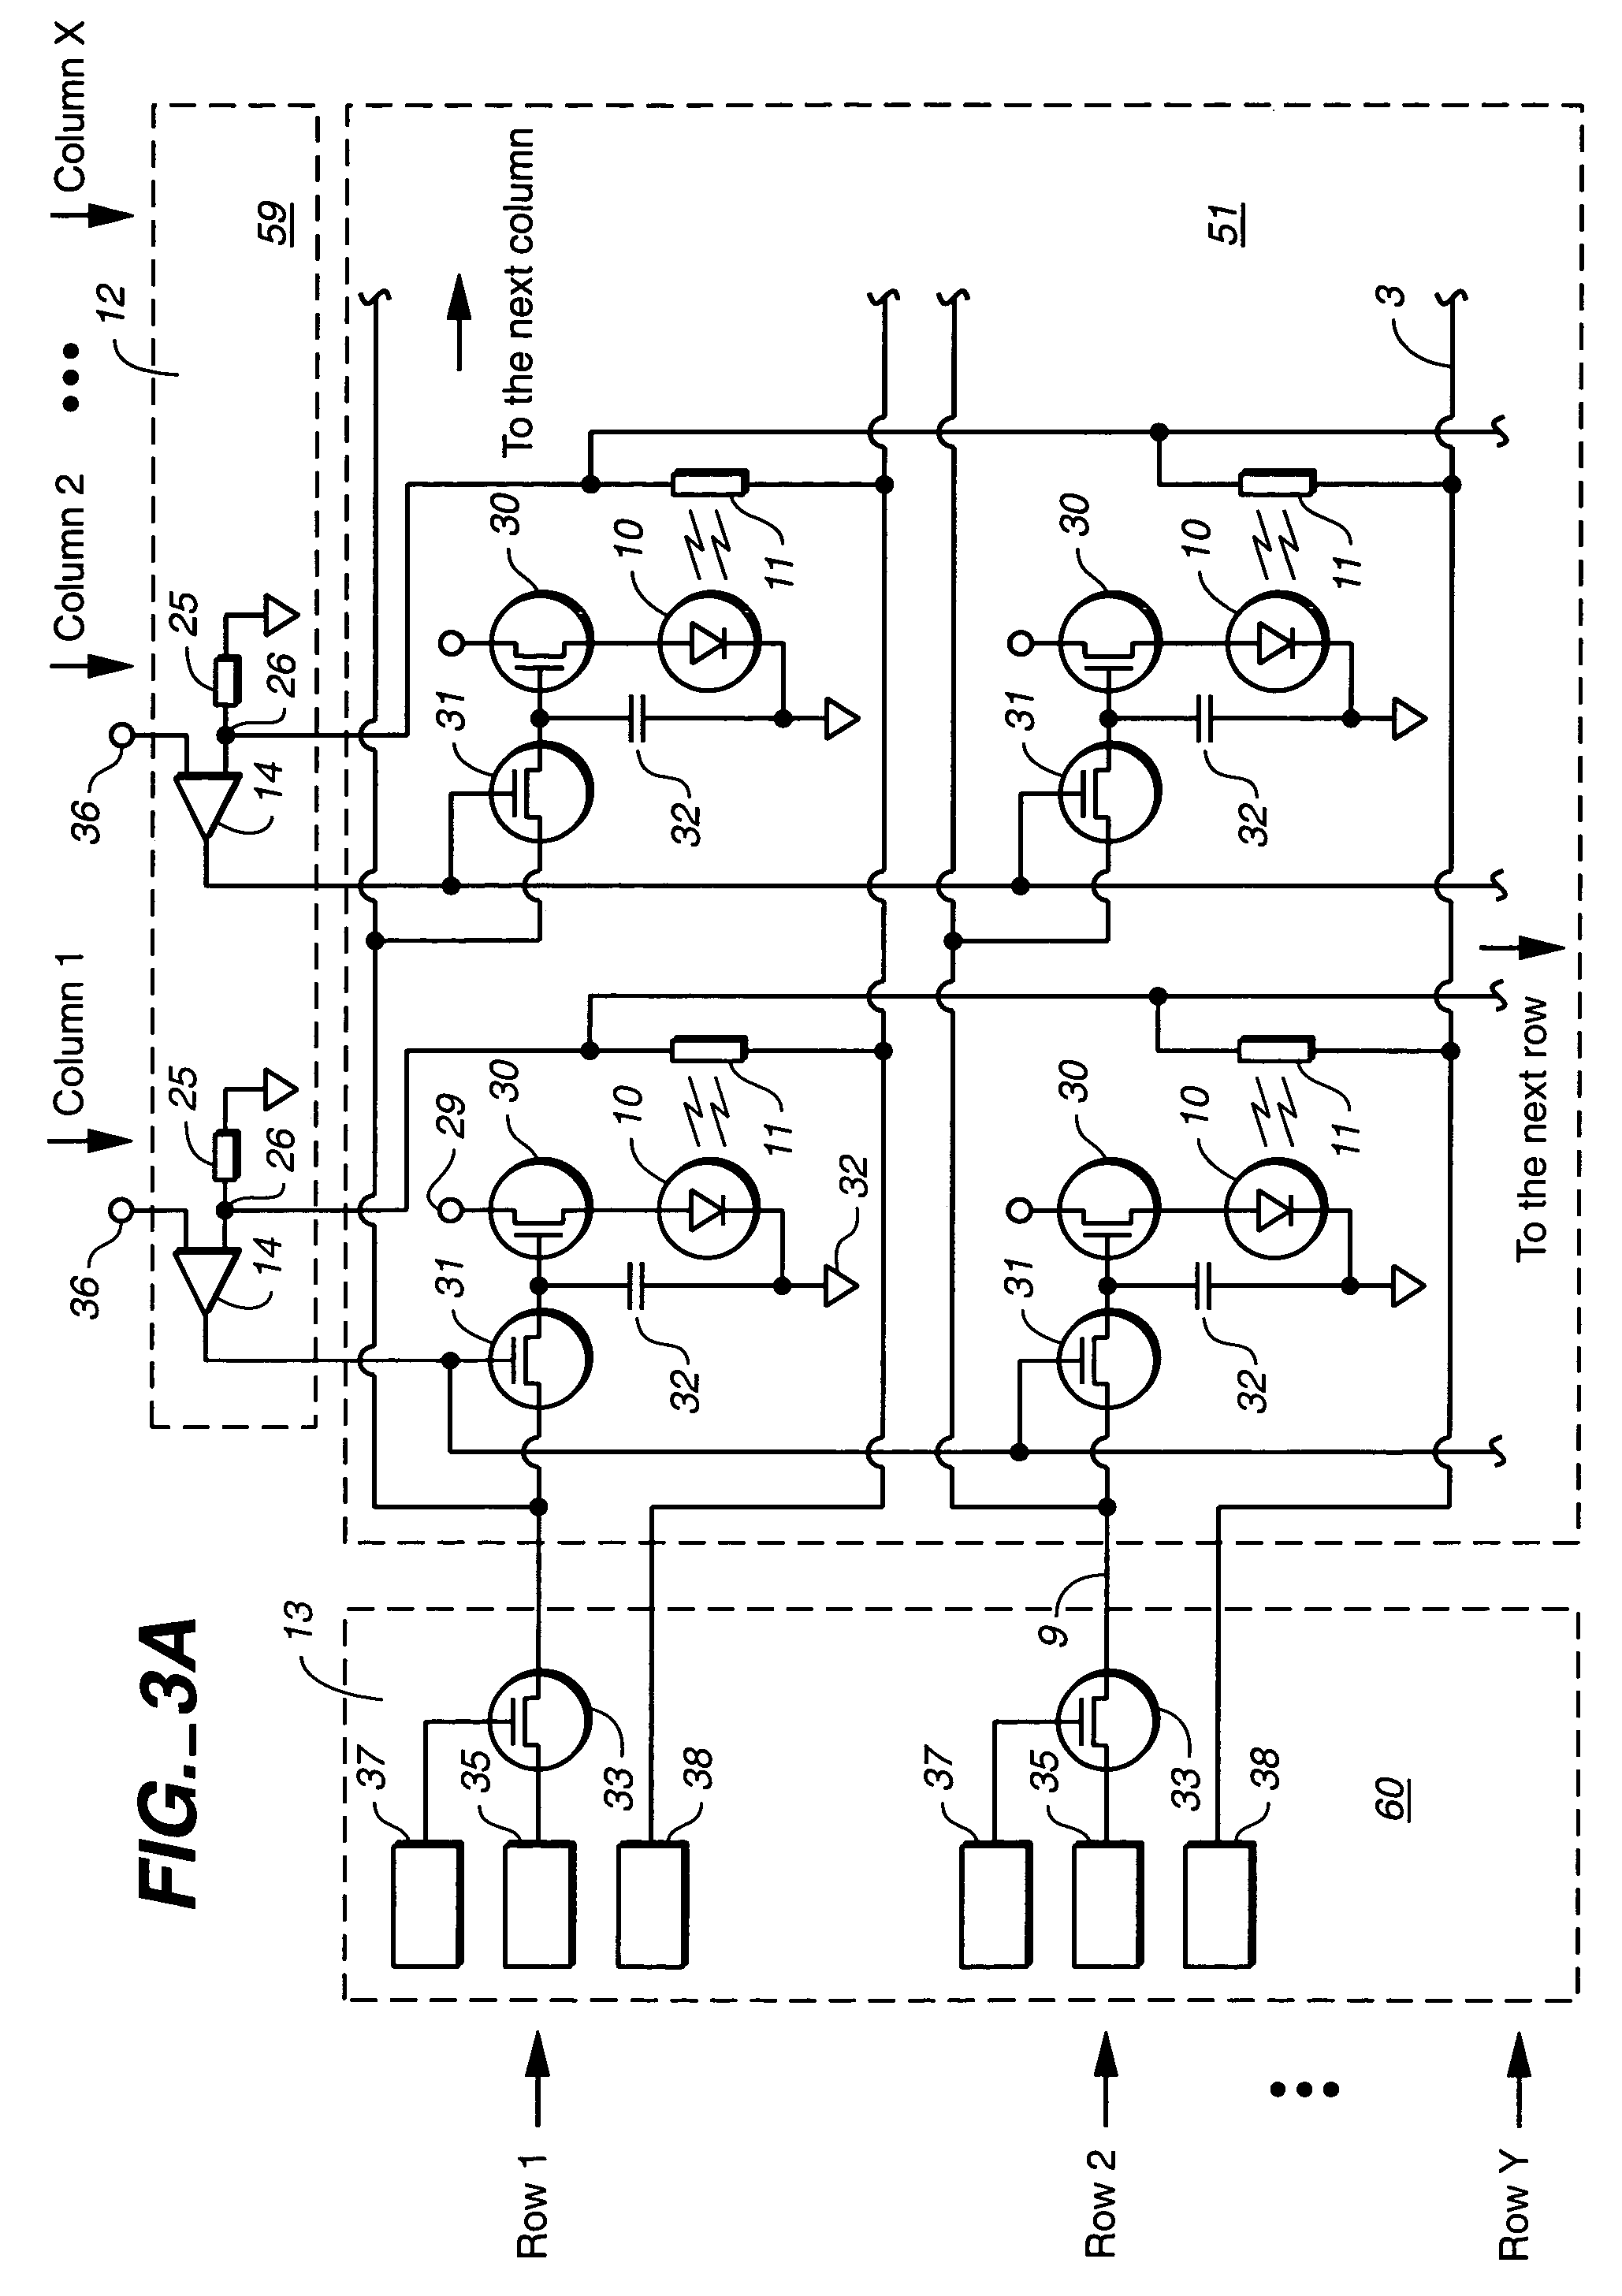 Method and apparatus for controlling an active matrix display